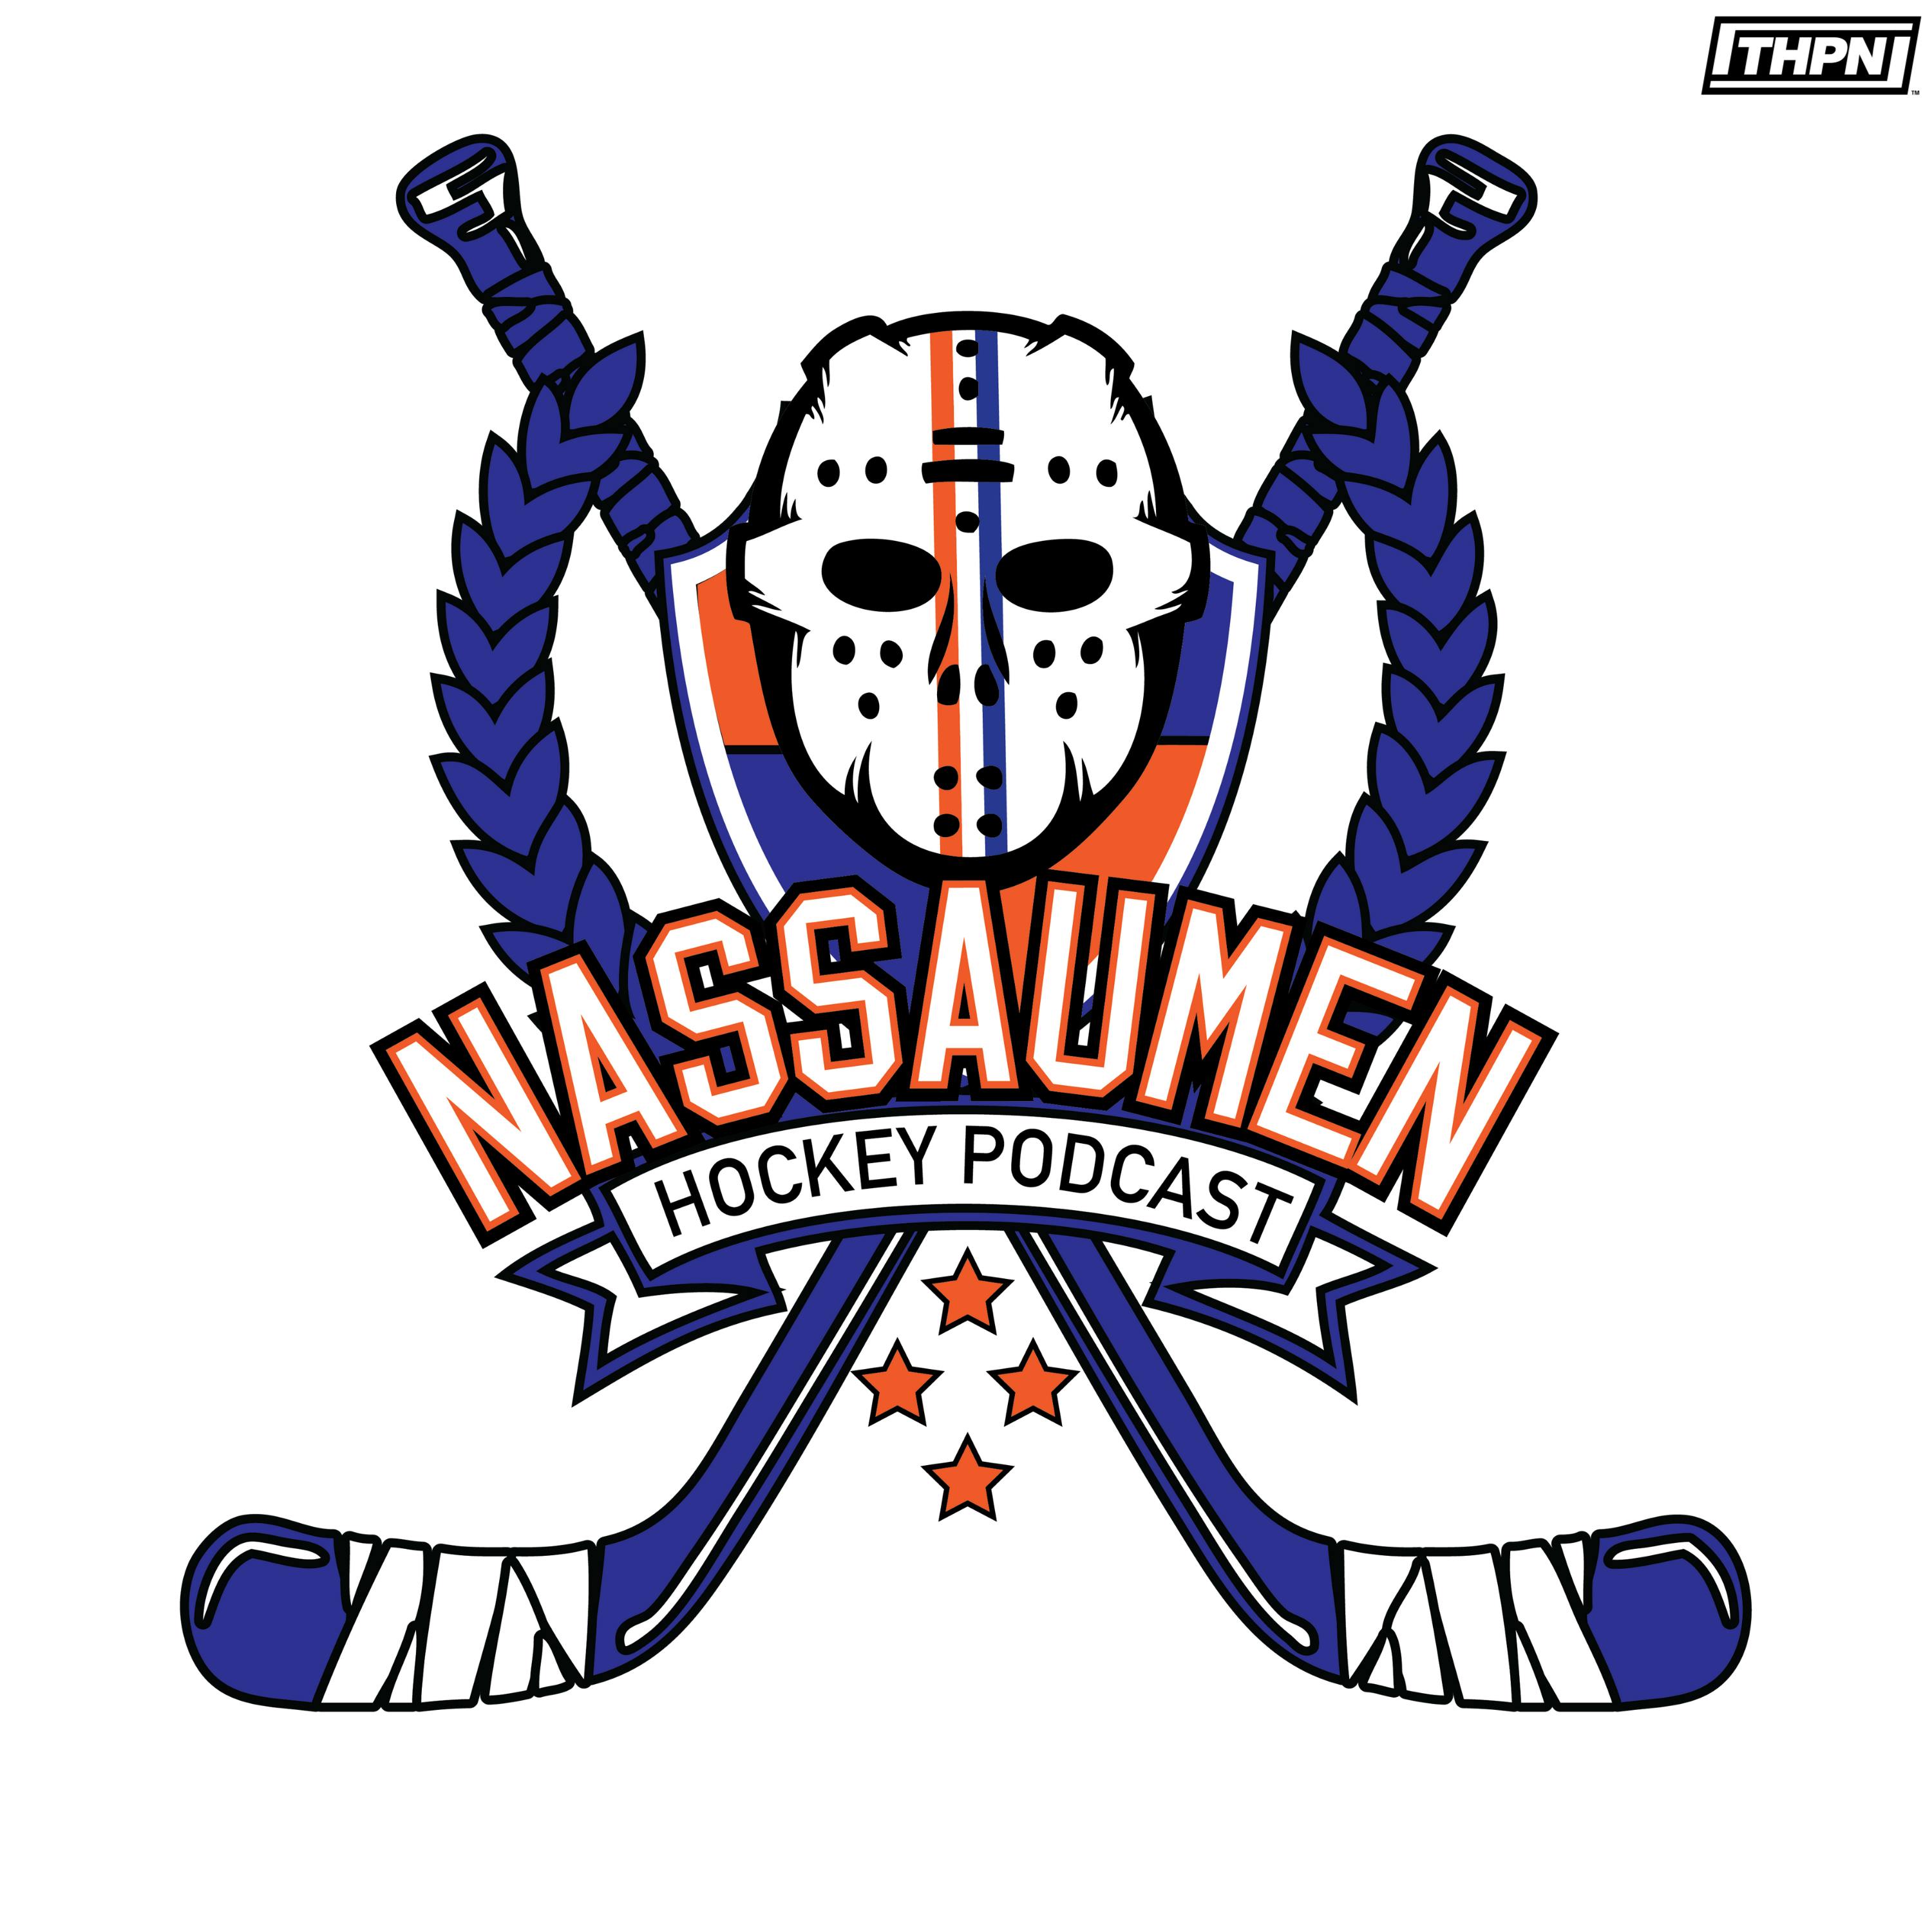 Episode 112: Is Sorokin a Top-3 NHL Goalie? Plus, Islanders Mailbag and the Stanley Cup Final